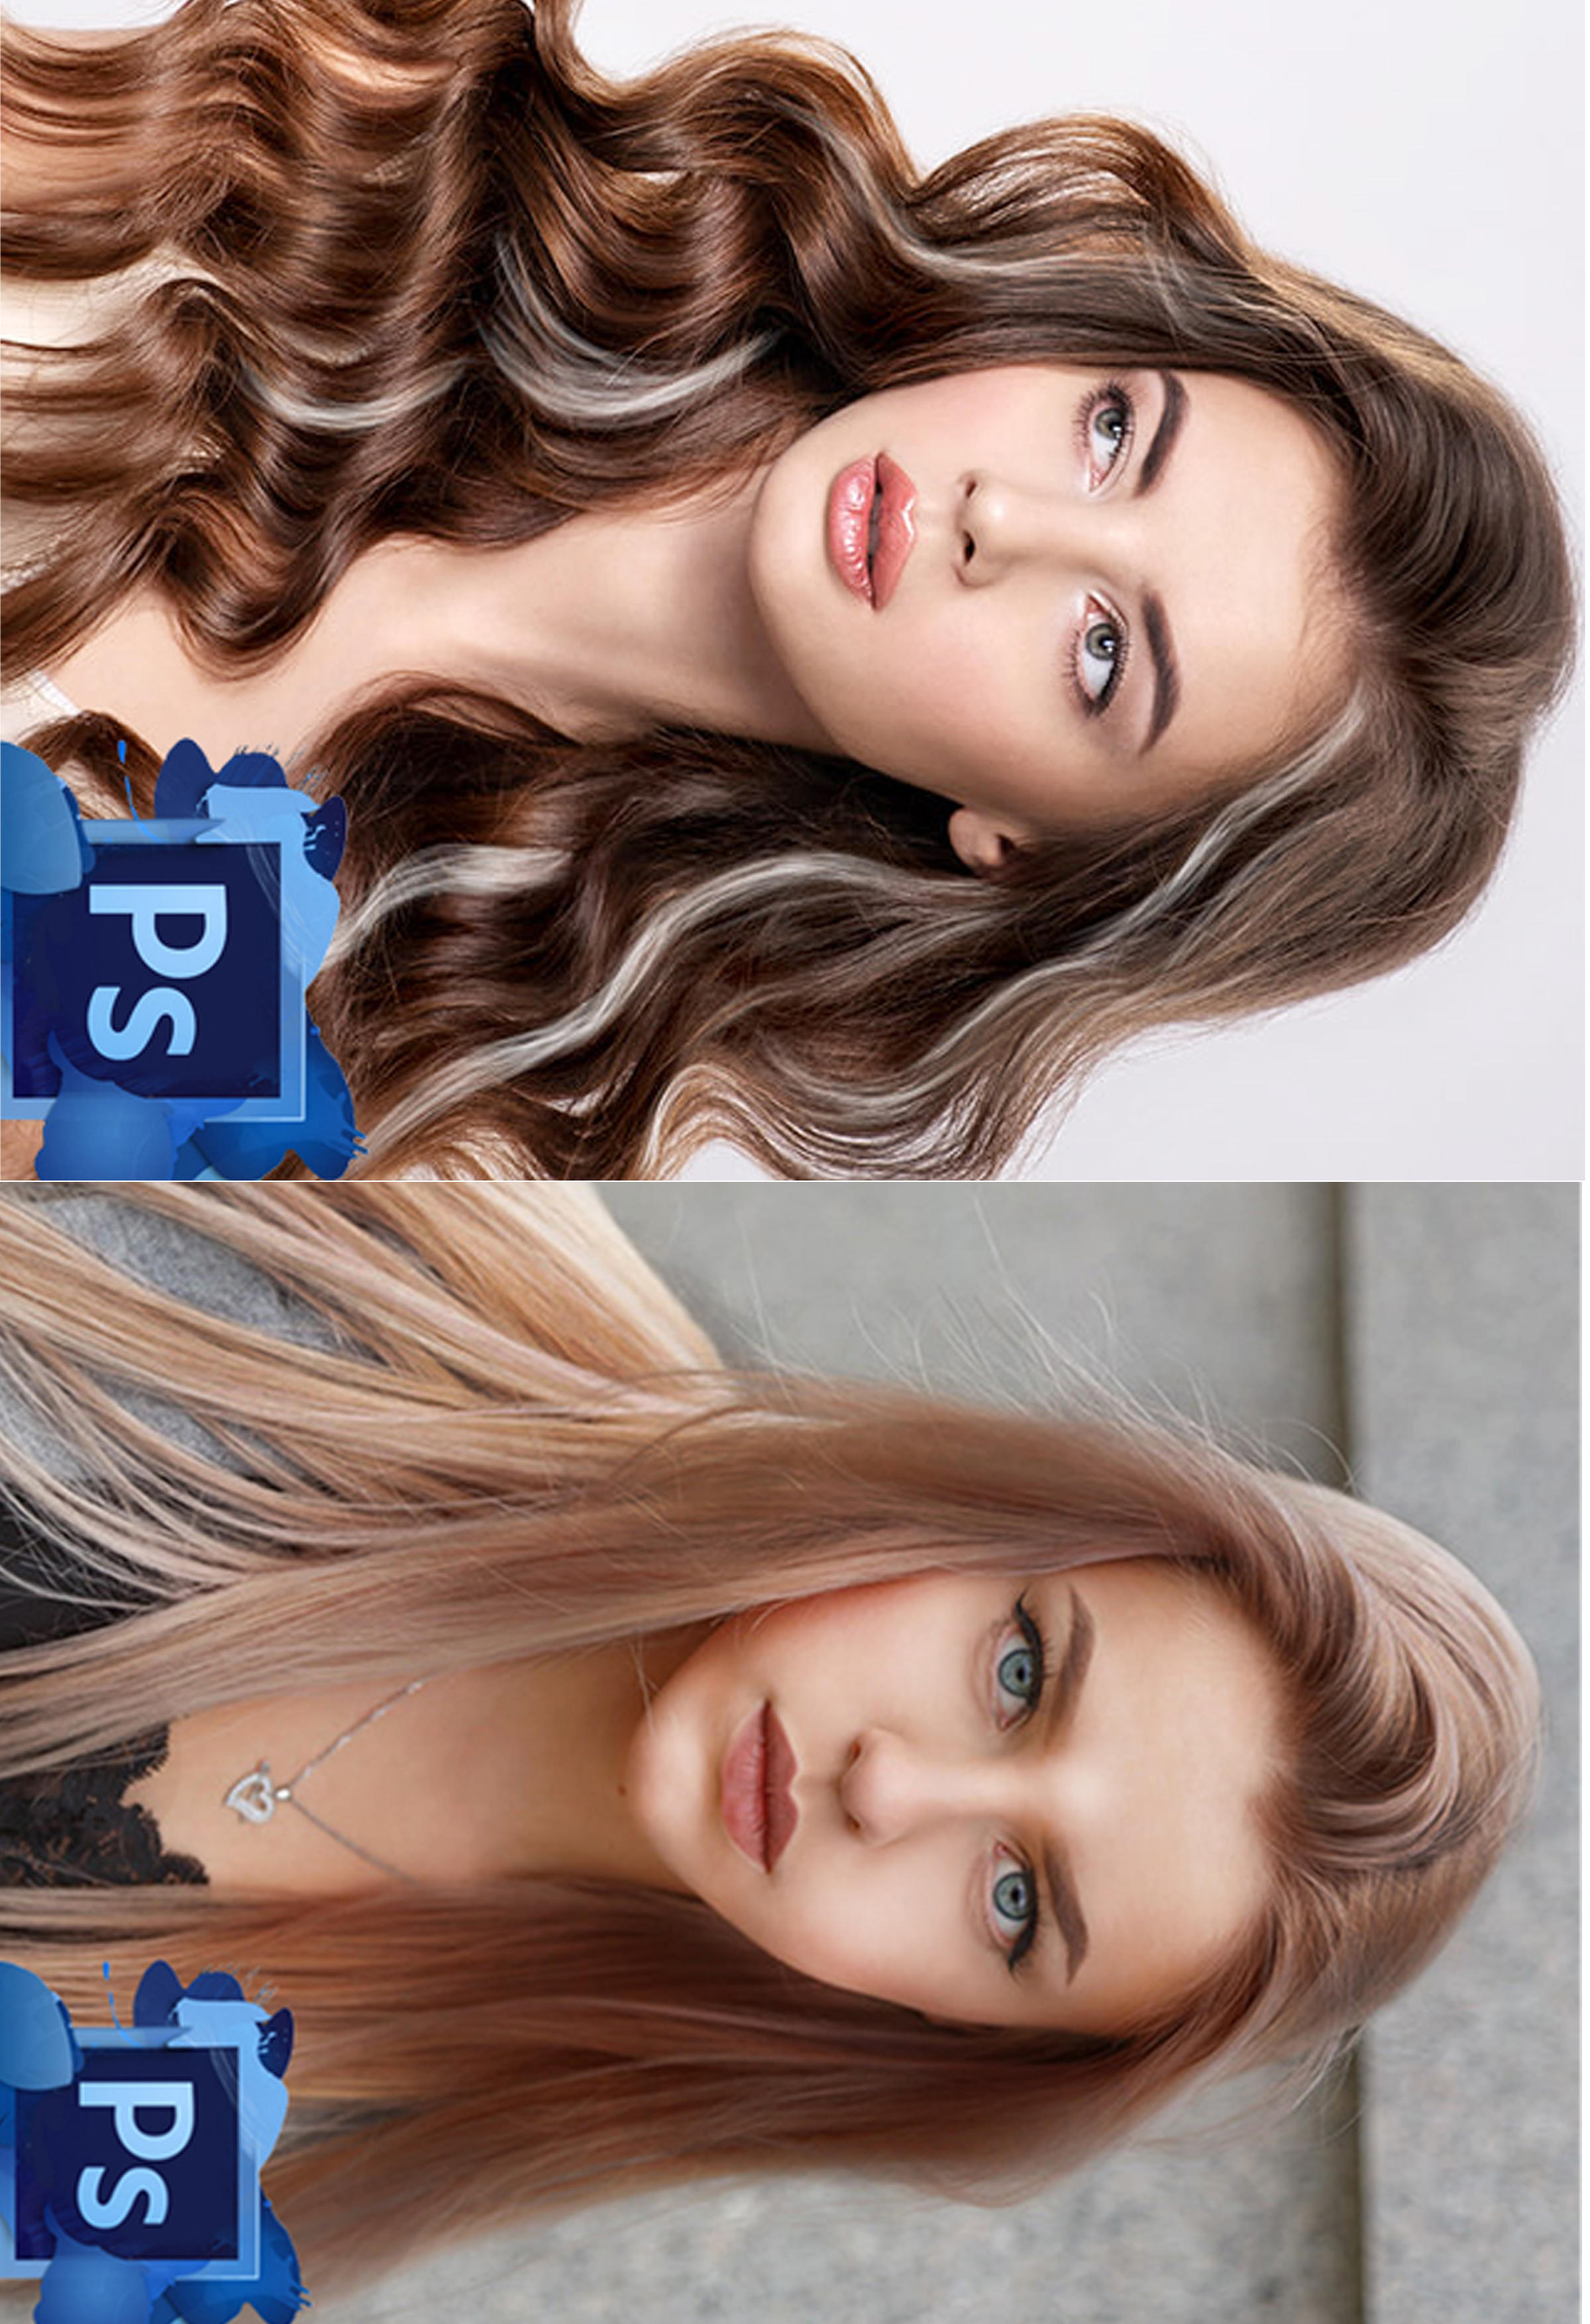 I will do Skin, Beauty Retouching and Professional Photo Editing